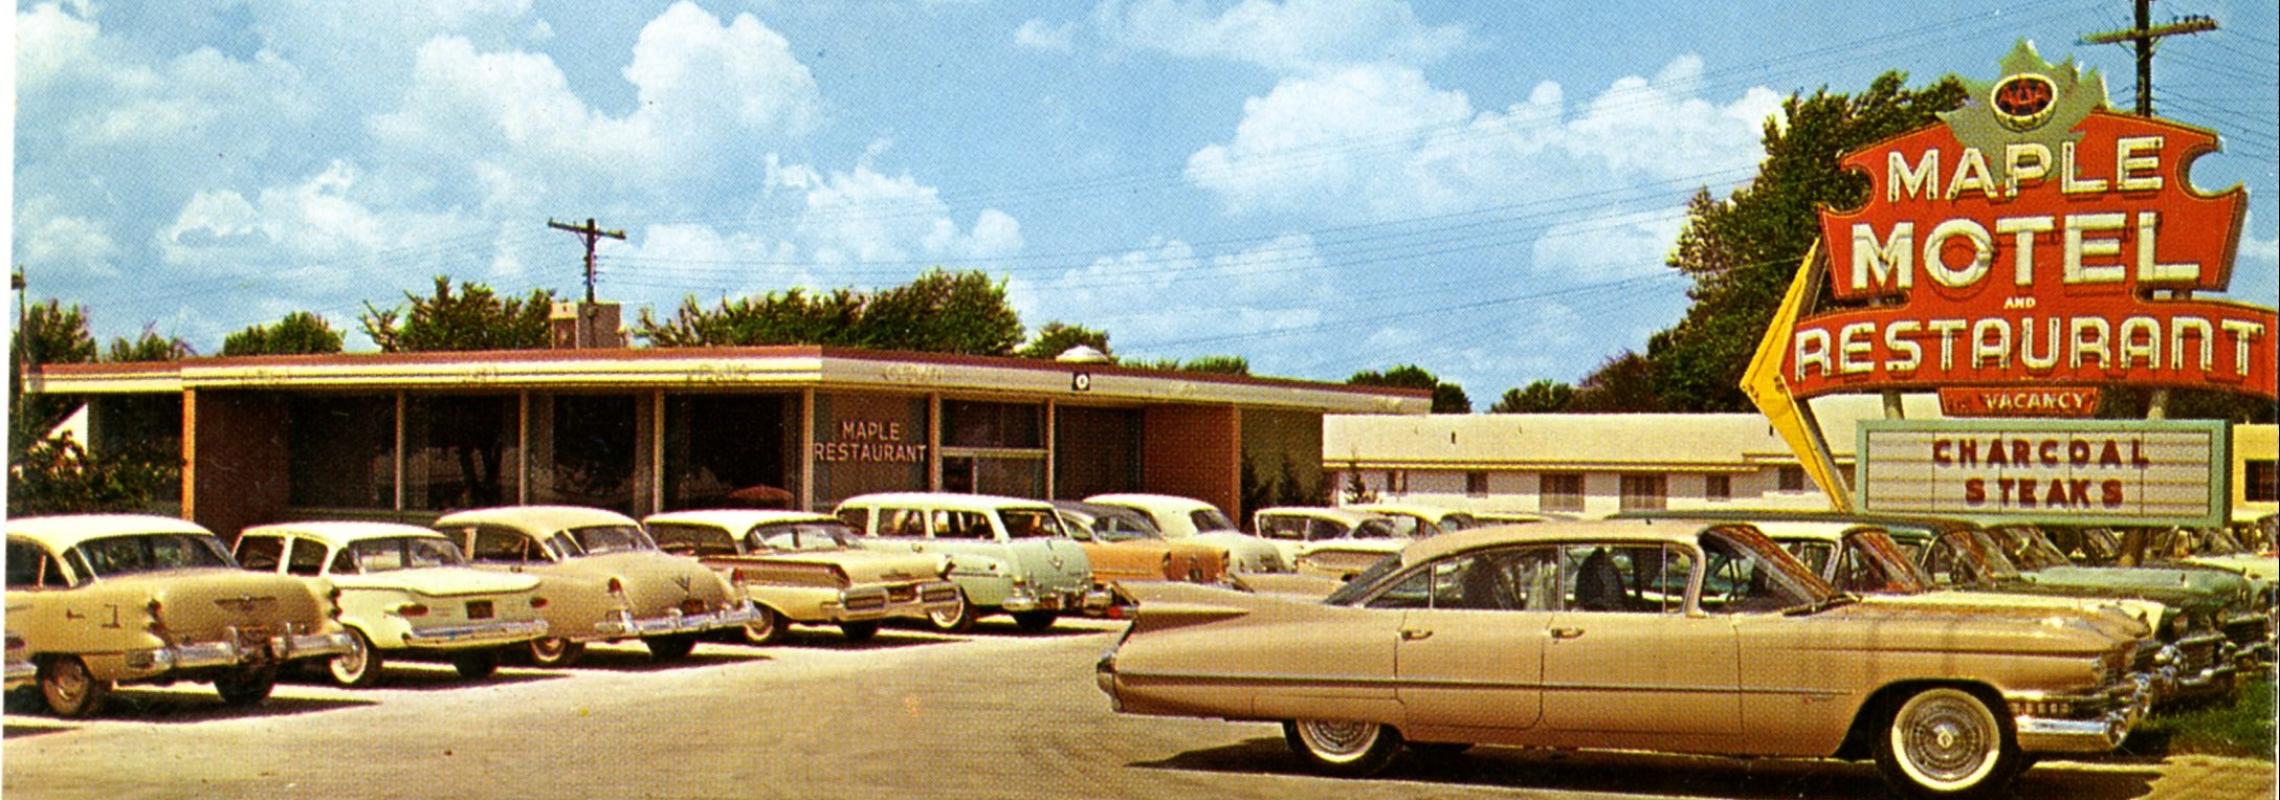 1950s-era motel and cars with large motel sign reading "Maple Motel and Restaurant"